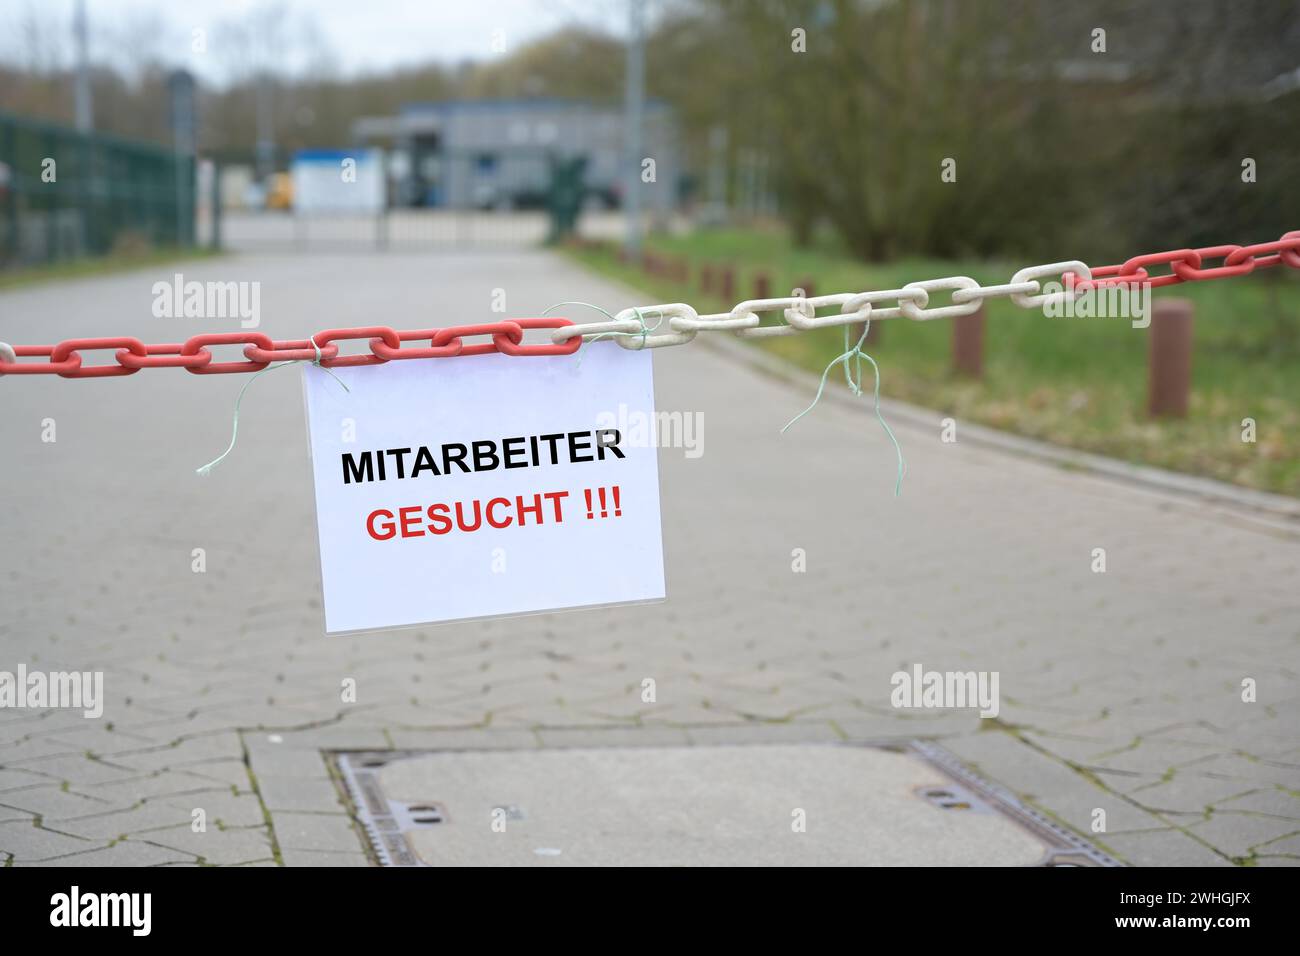 Sign at the entrance of a company with German text â€œMitarbeiter gesuchtâ€, meaning â€œEmployees wantedâ€, concept for increa Stock Photo